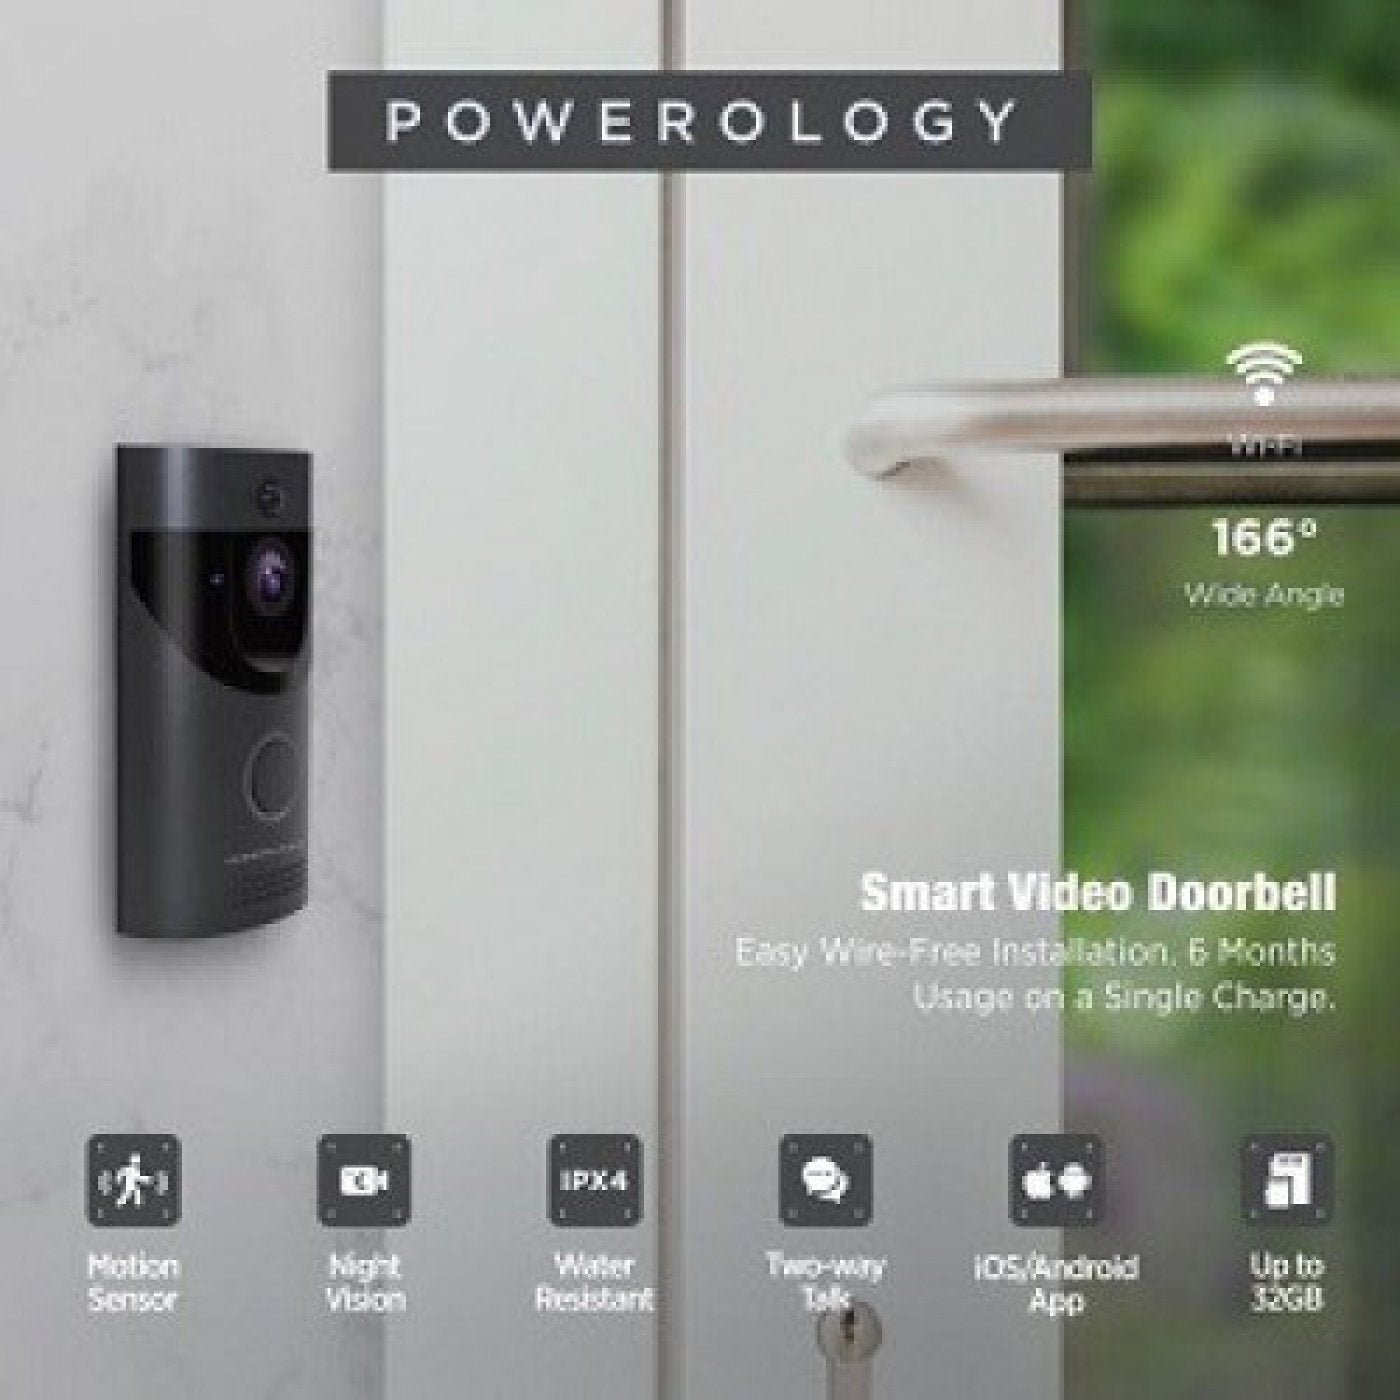 Powerology Smart Video Doorbell With Night Vision And Motion Sensor - Black